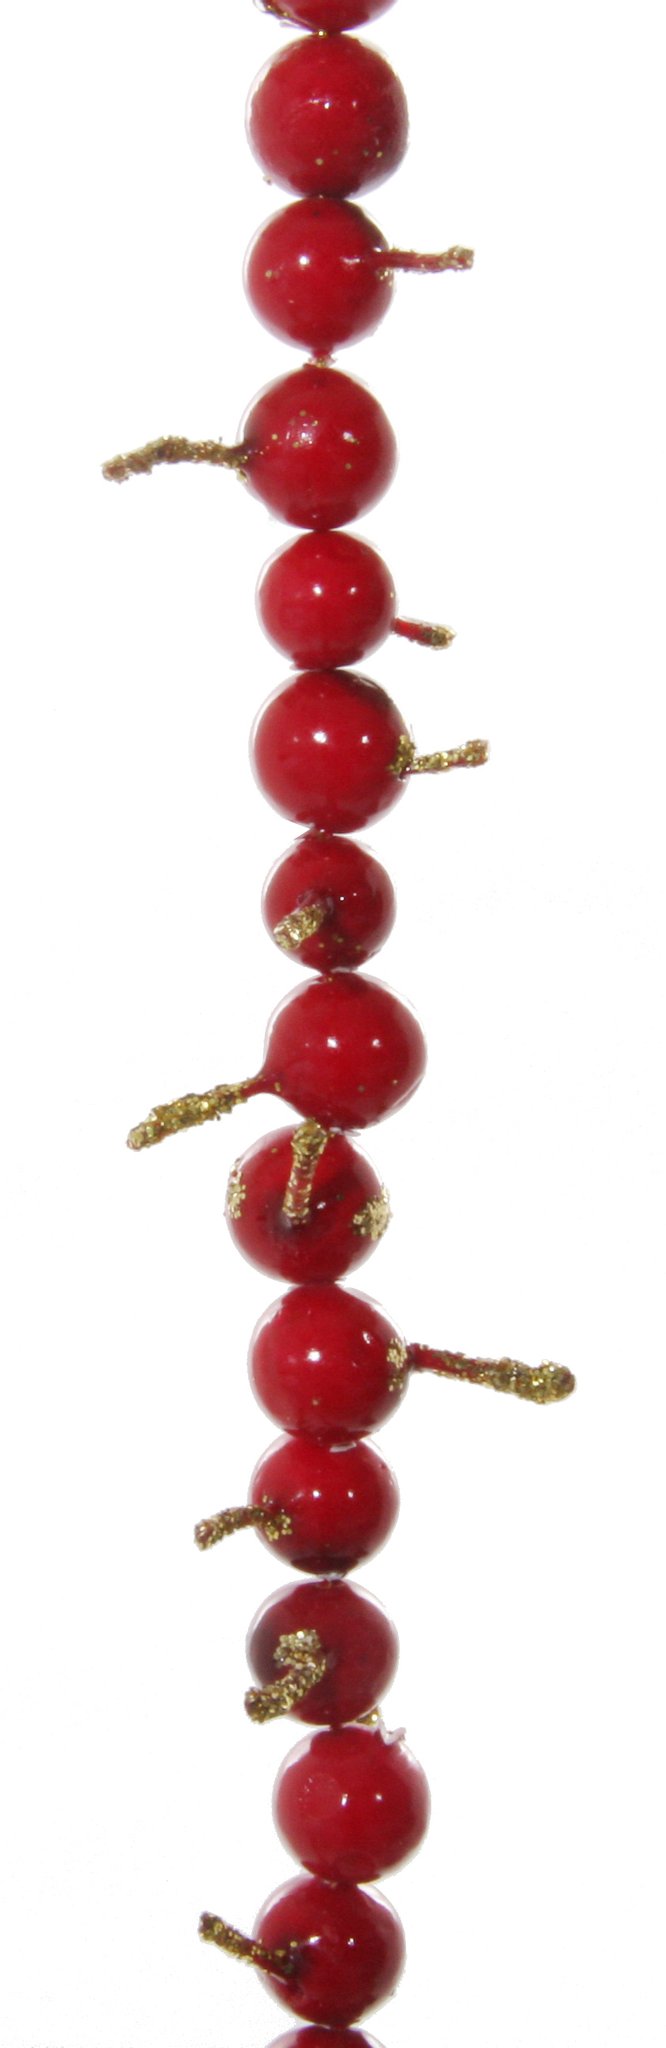 Shishi Red and Gold Glittered Berries Garland  100CM